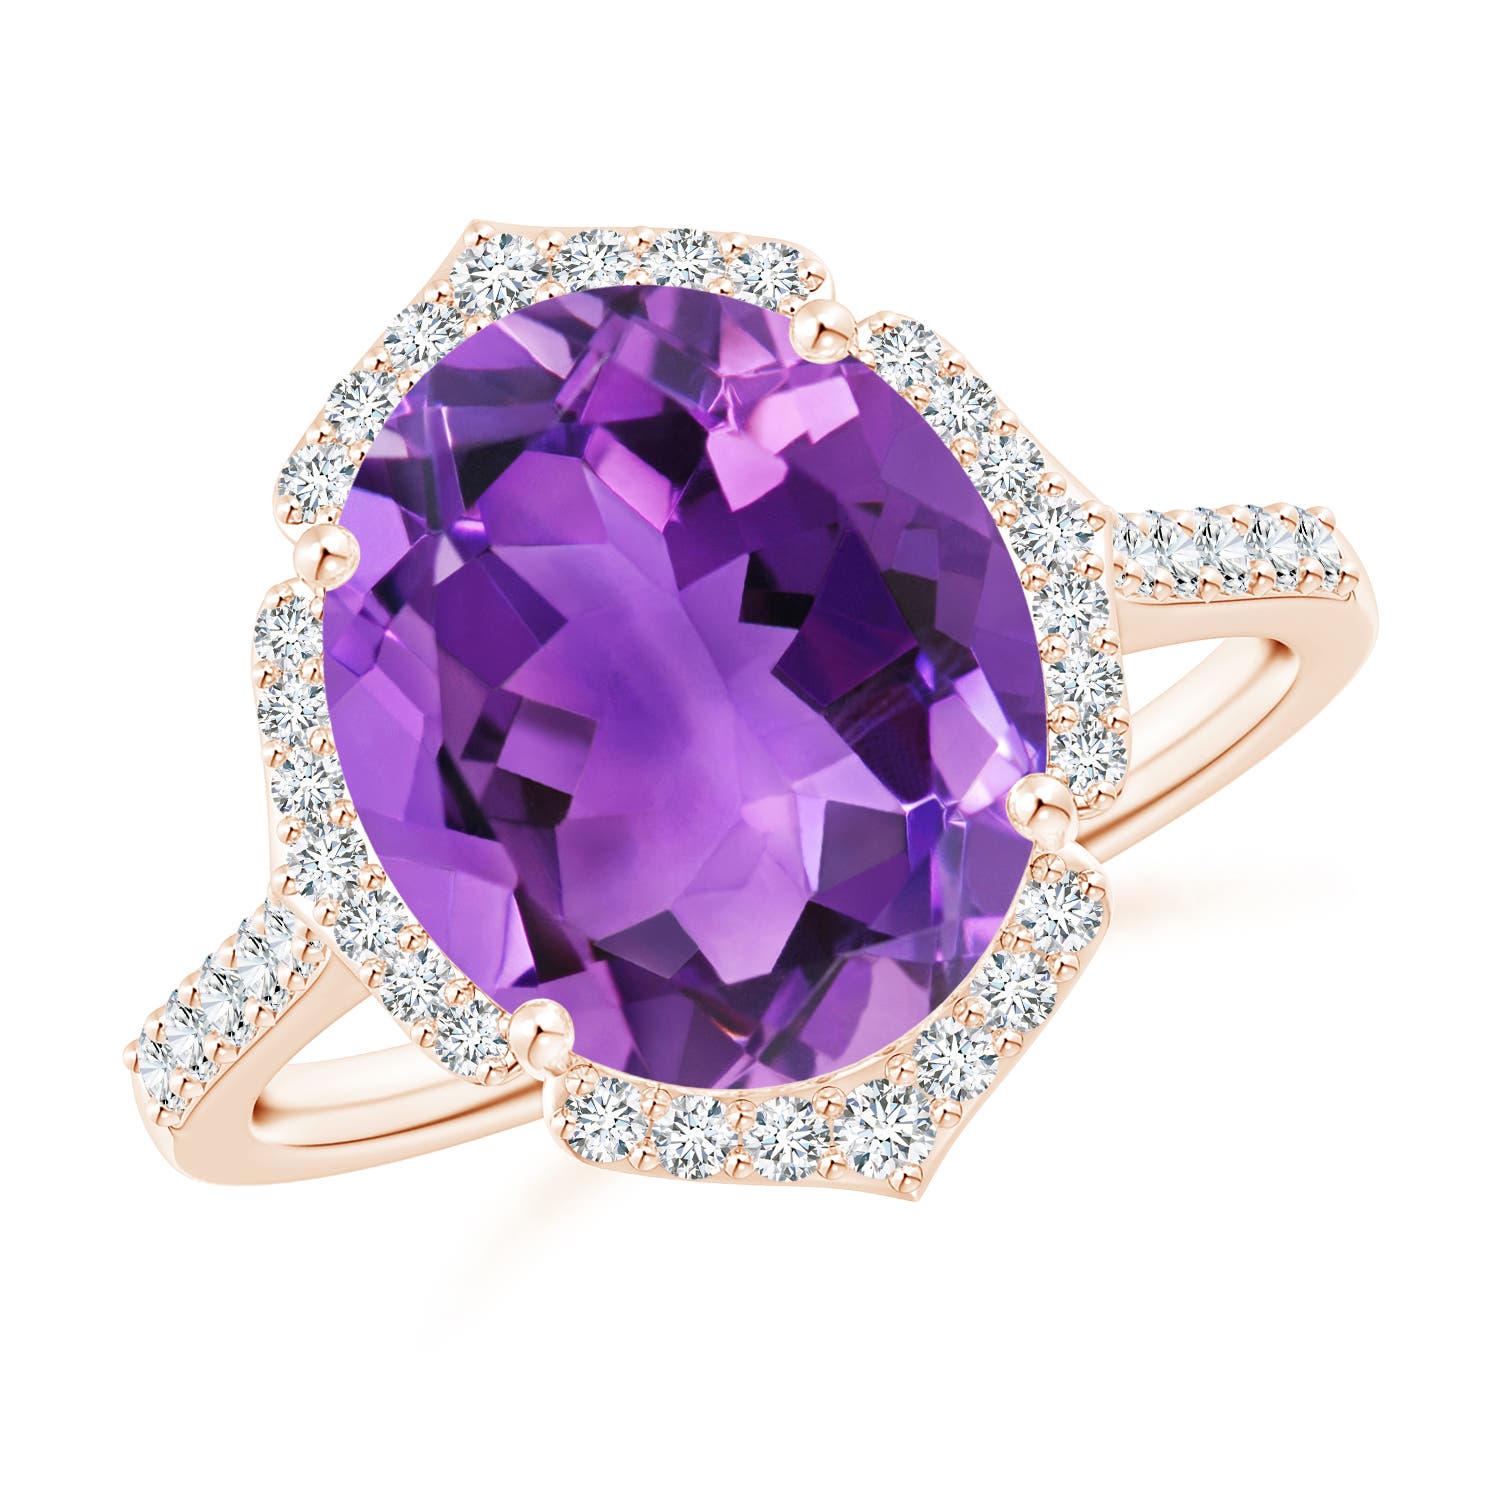 AAA - Amethyst / 4.59 CT / 14 KT Rose Gold